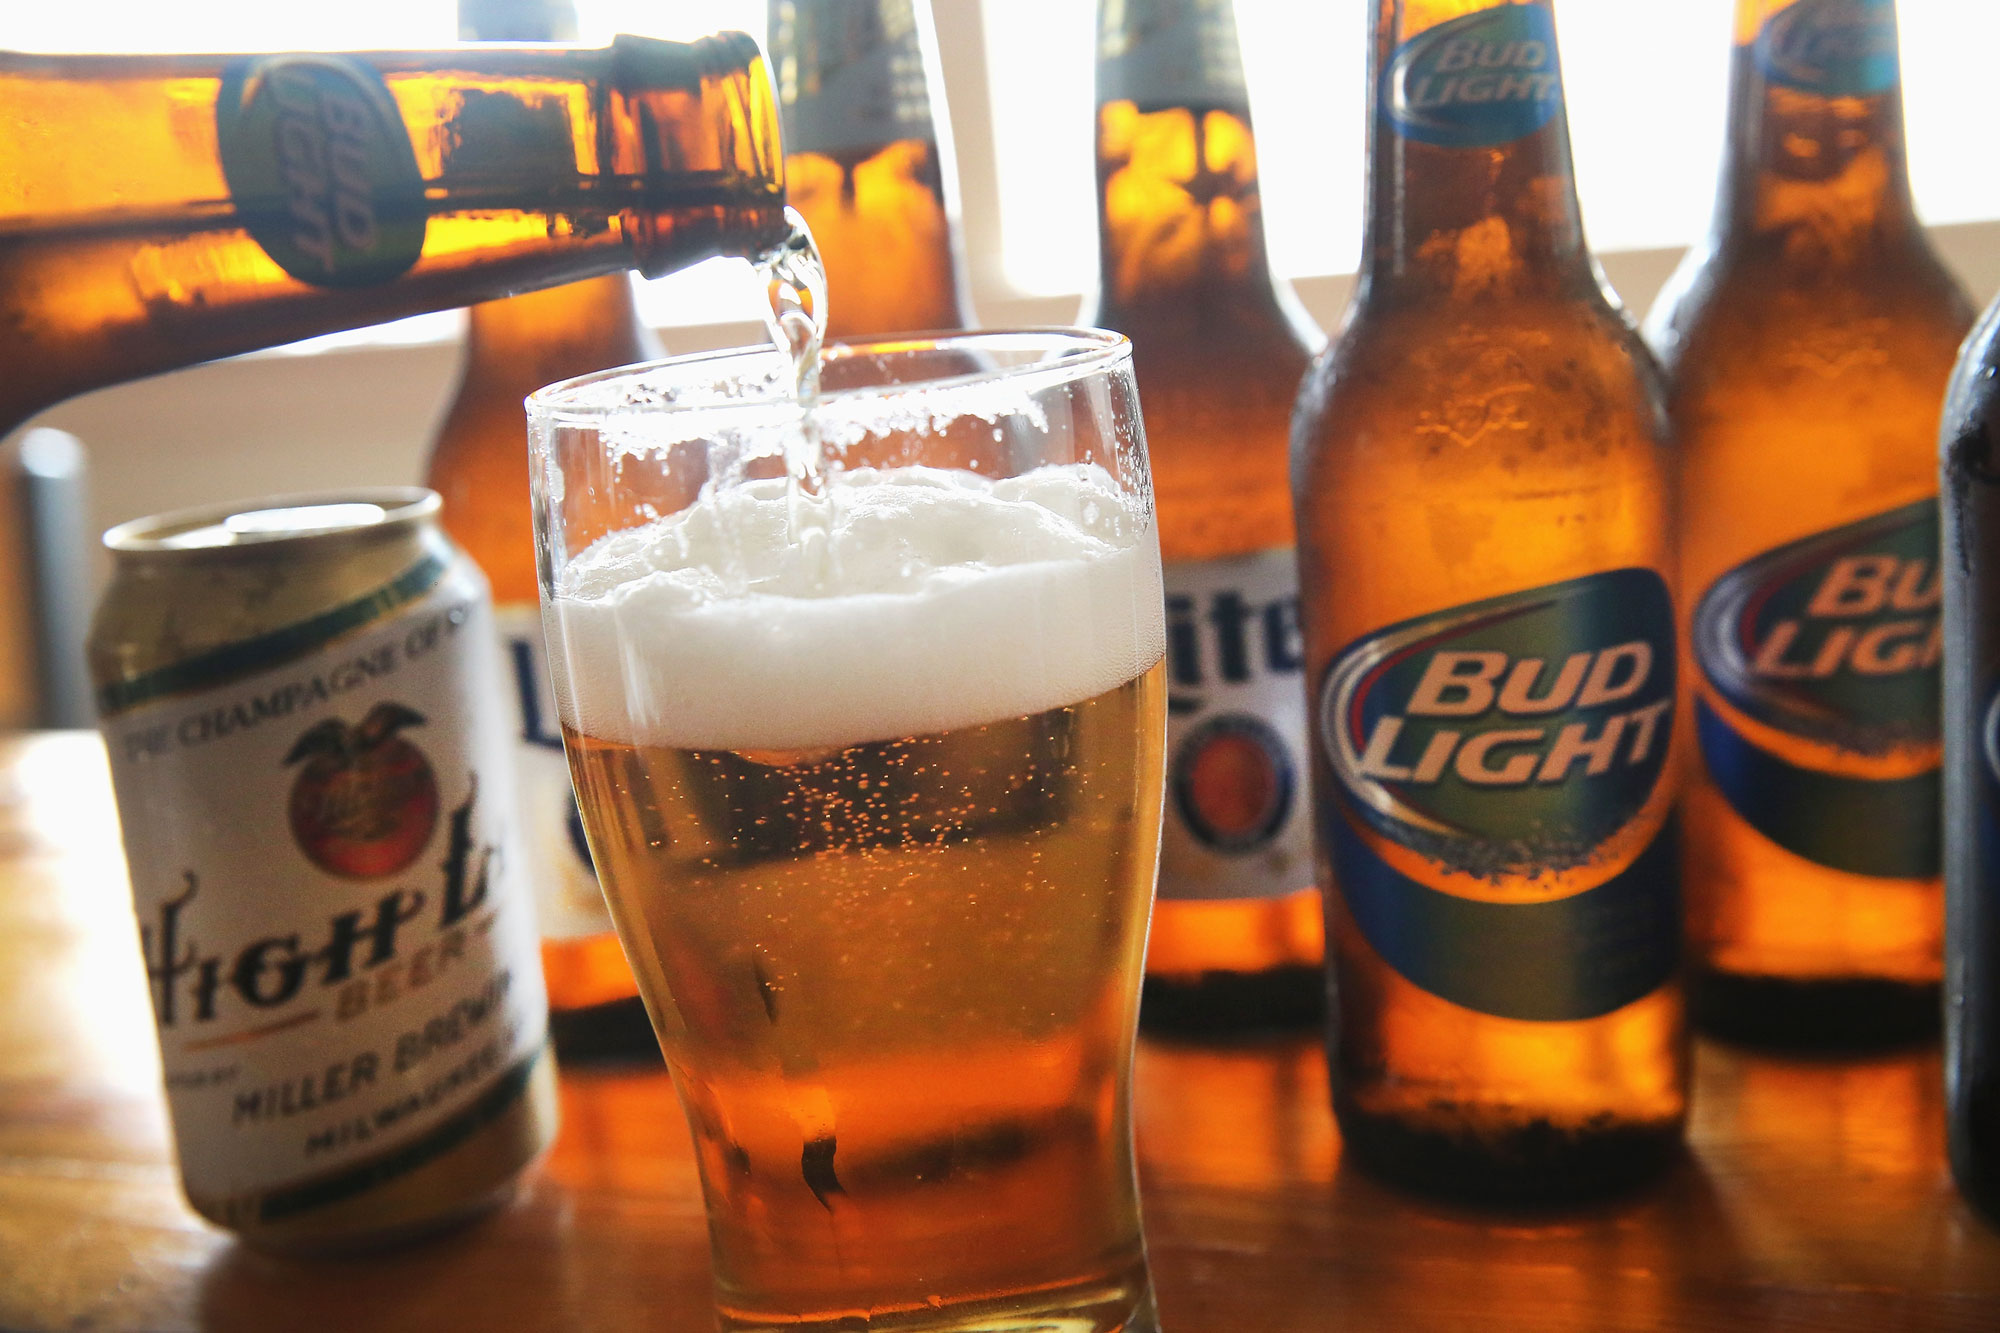 Bud Light beers sold for 33 cents to boost July 4 sales